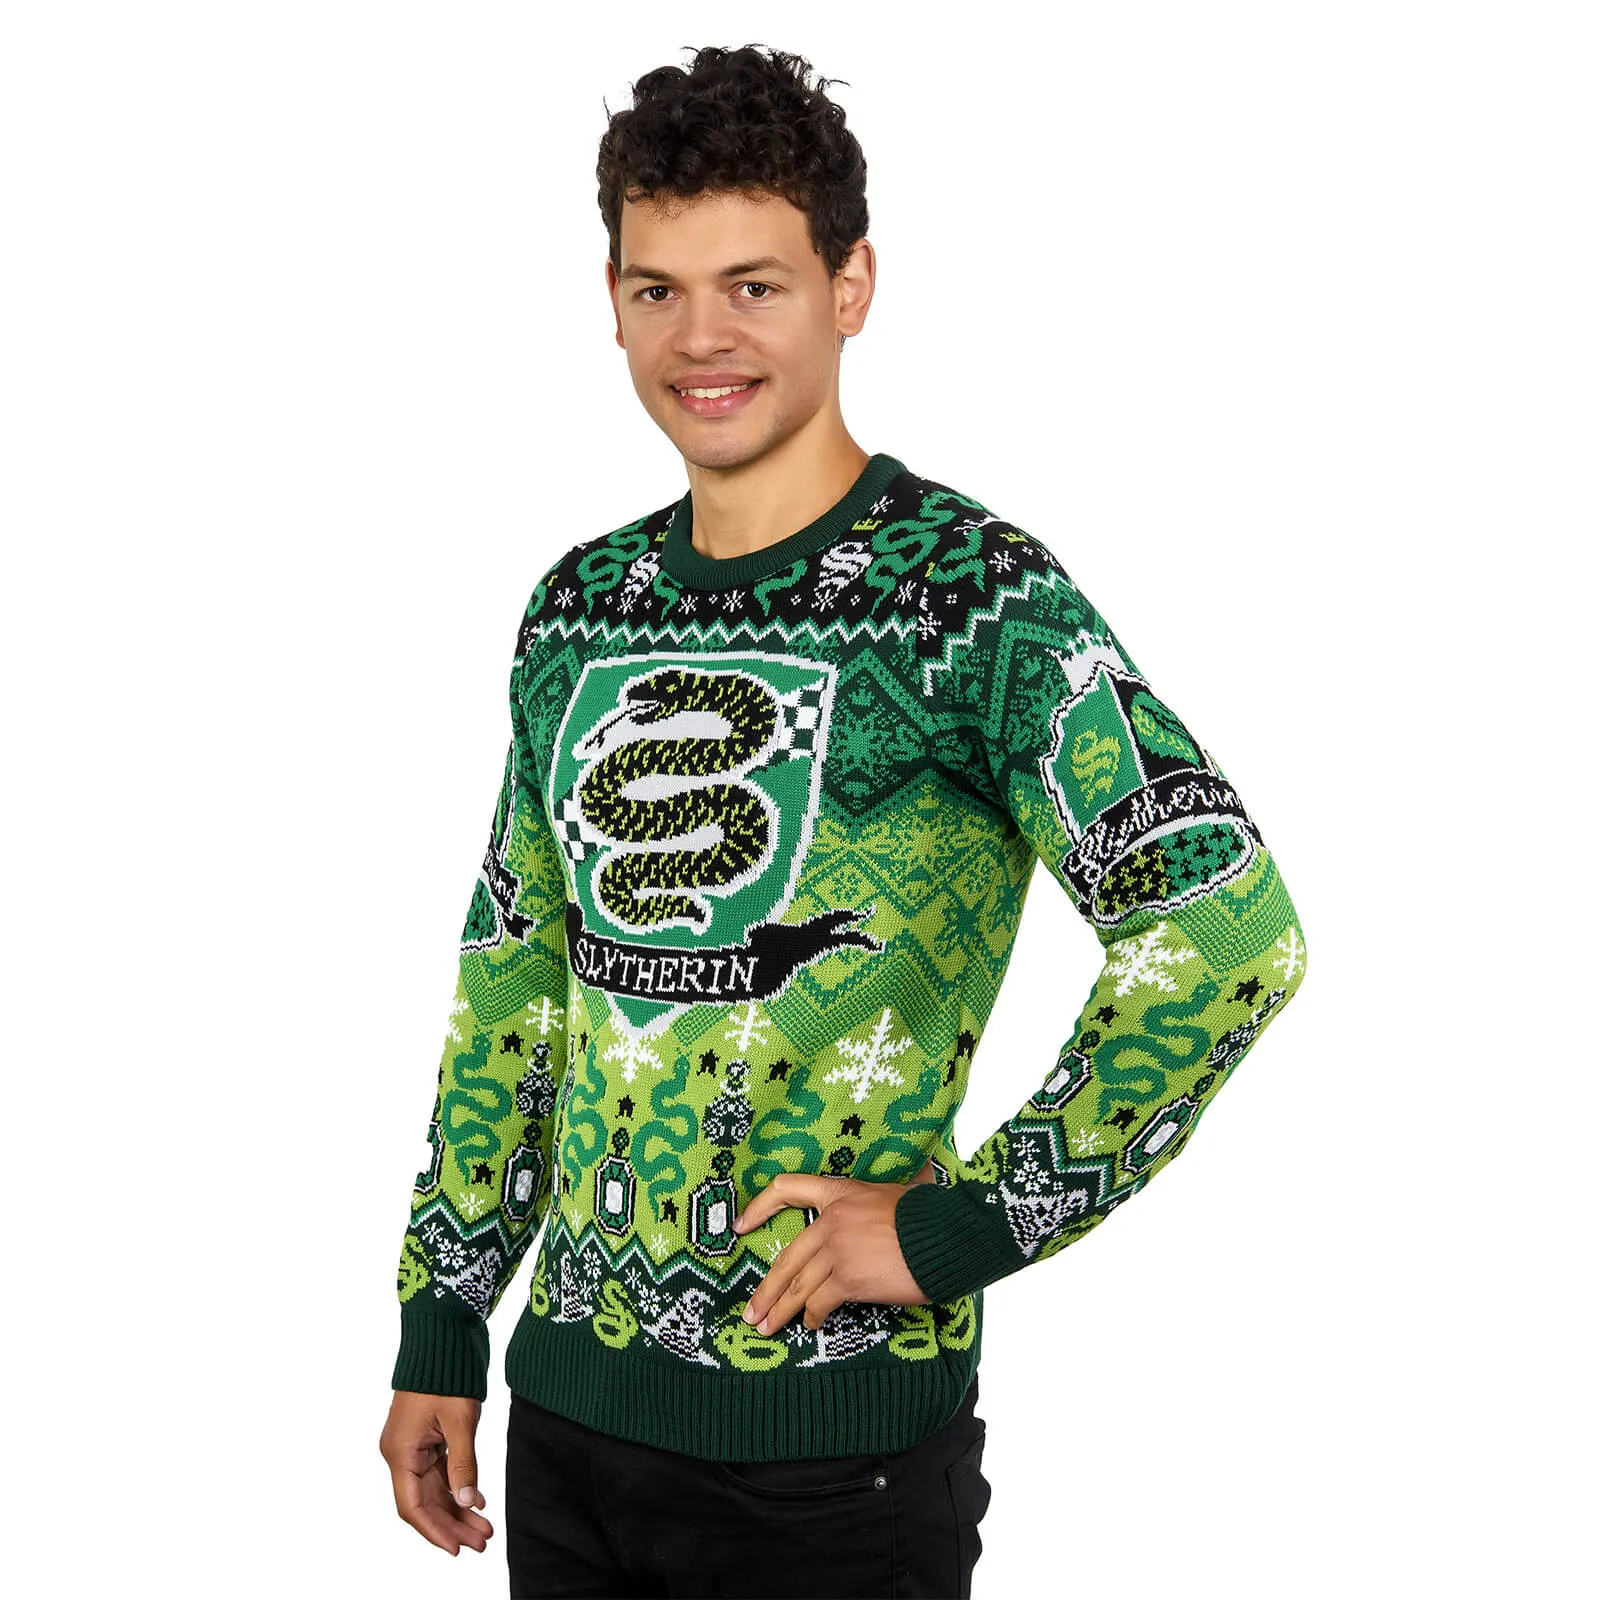 Slytherin House Crest Christmas Jumper - XS